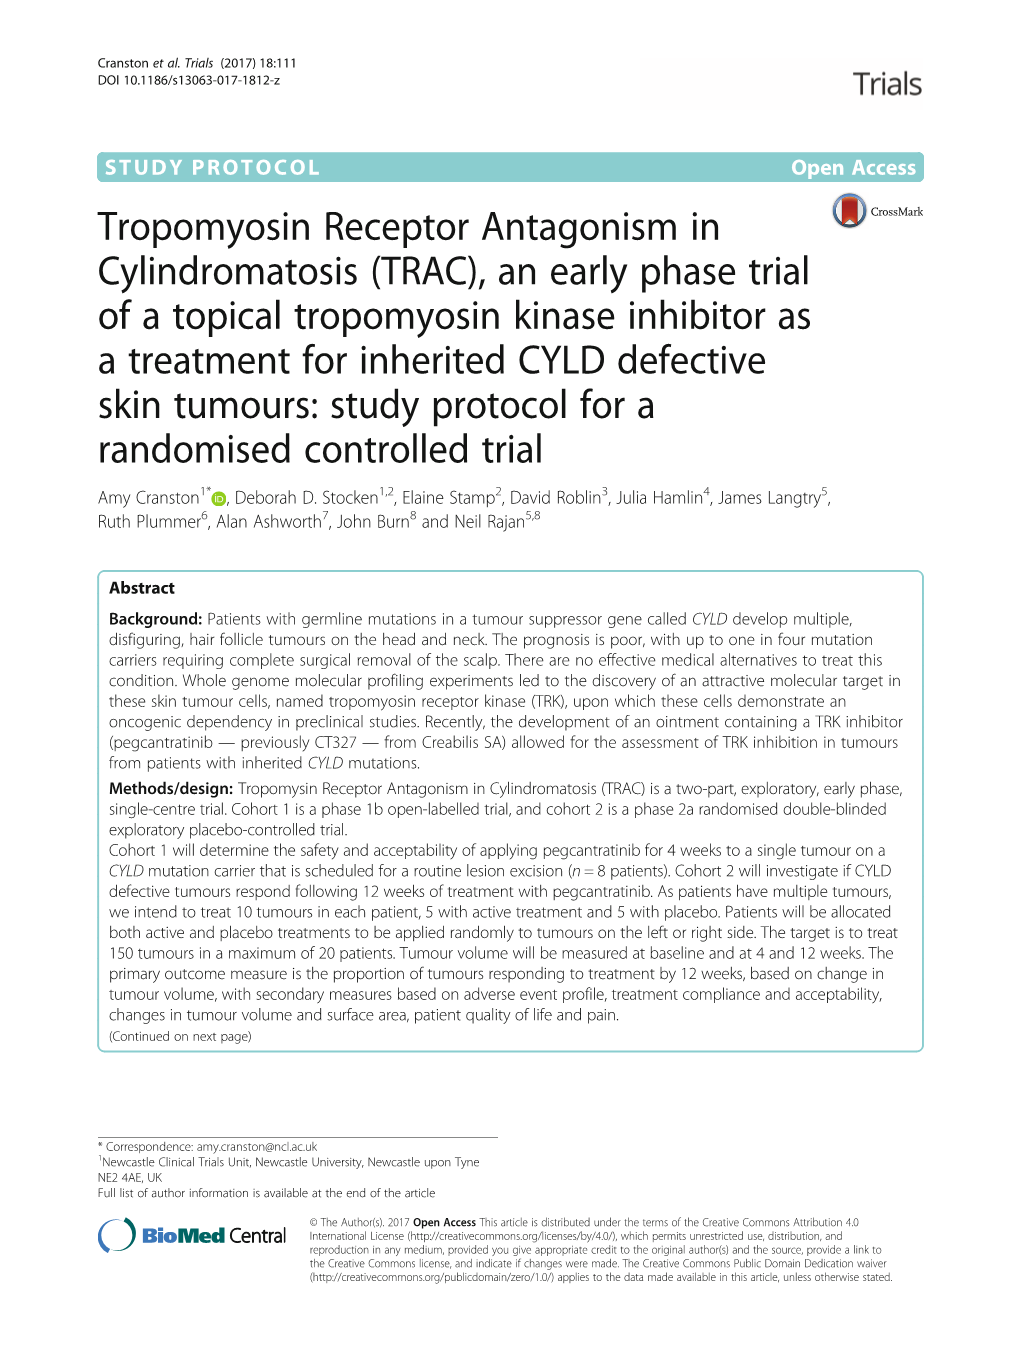 Tropomyosin Receptor Antagonism in Cylindromatosis (TRAC), an Early Phase Trial of a Topical Tropomyosin Kinase Inhibitor As